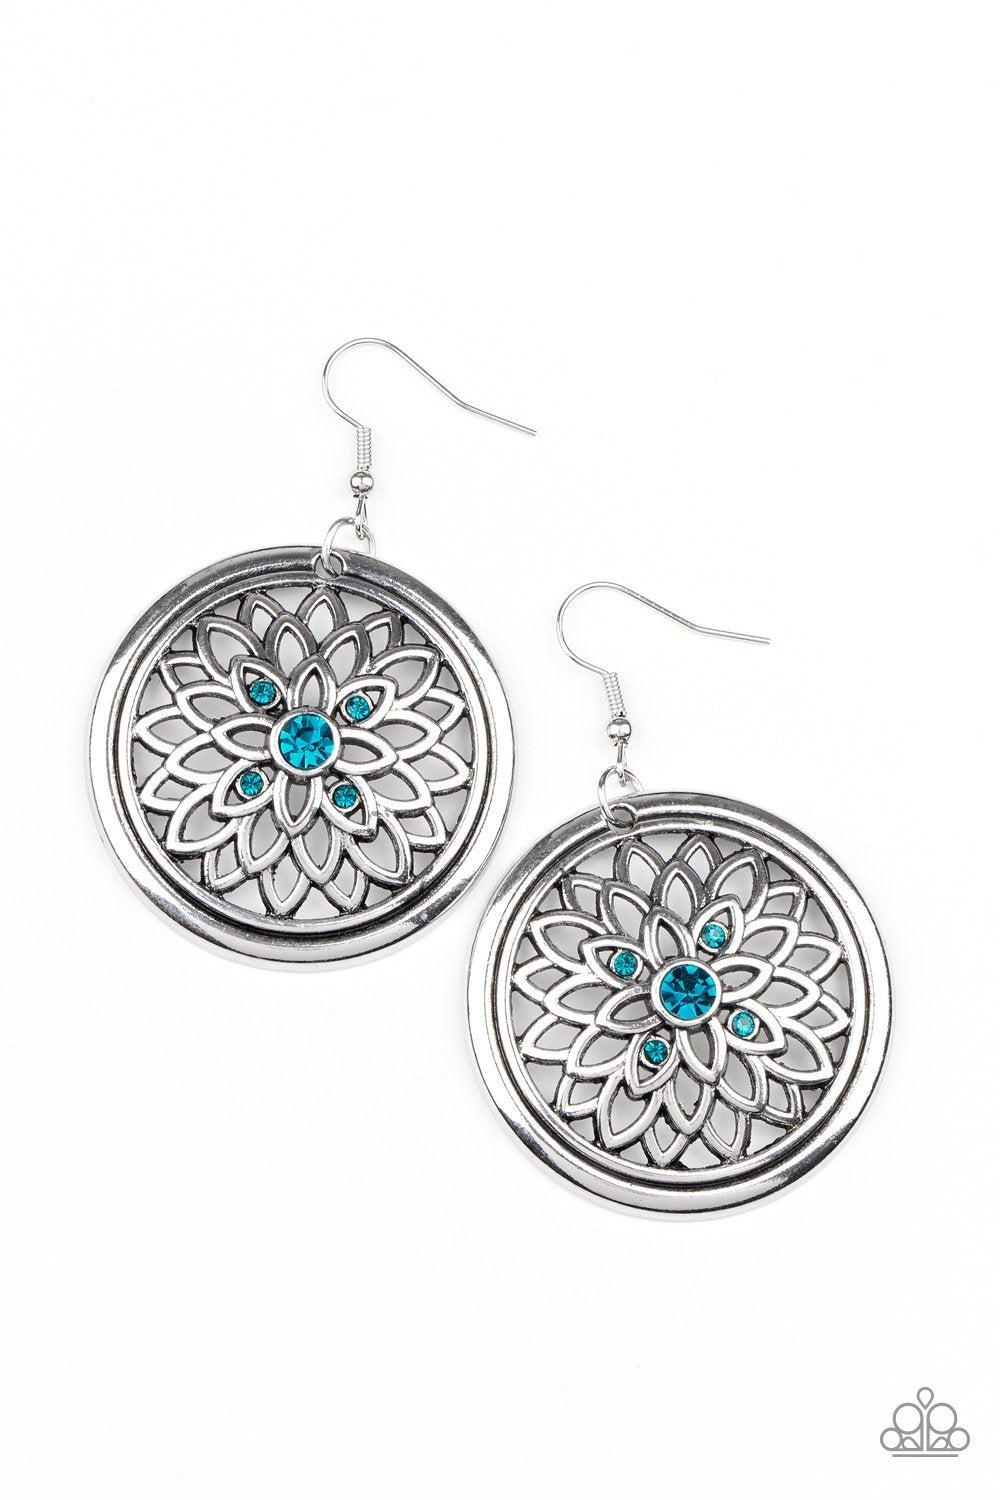 Mega Medallions Blue Rhinestone and Silver Filigree Earrings - Paparazzi Accessories- lightbox - CarasShop.com - $5 Jewelry by Cara Jewels